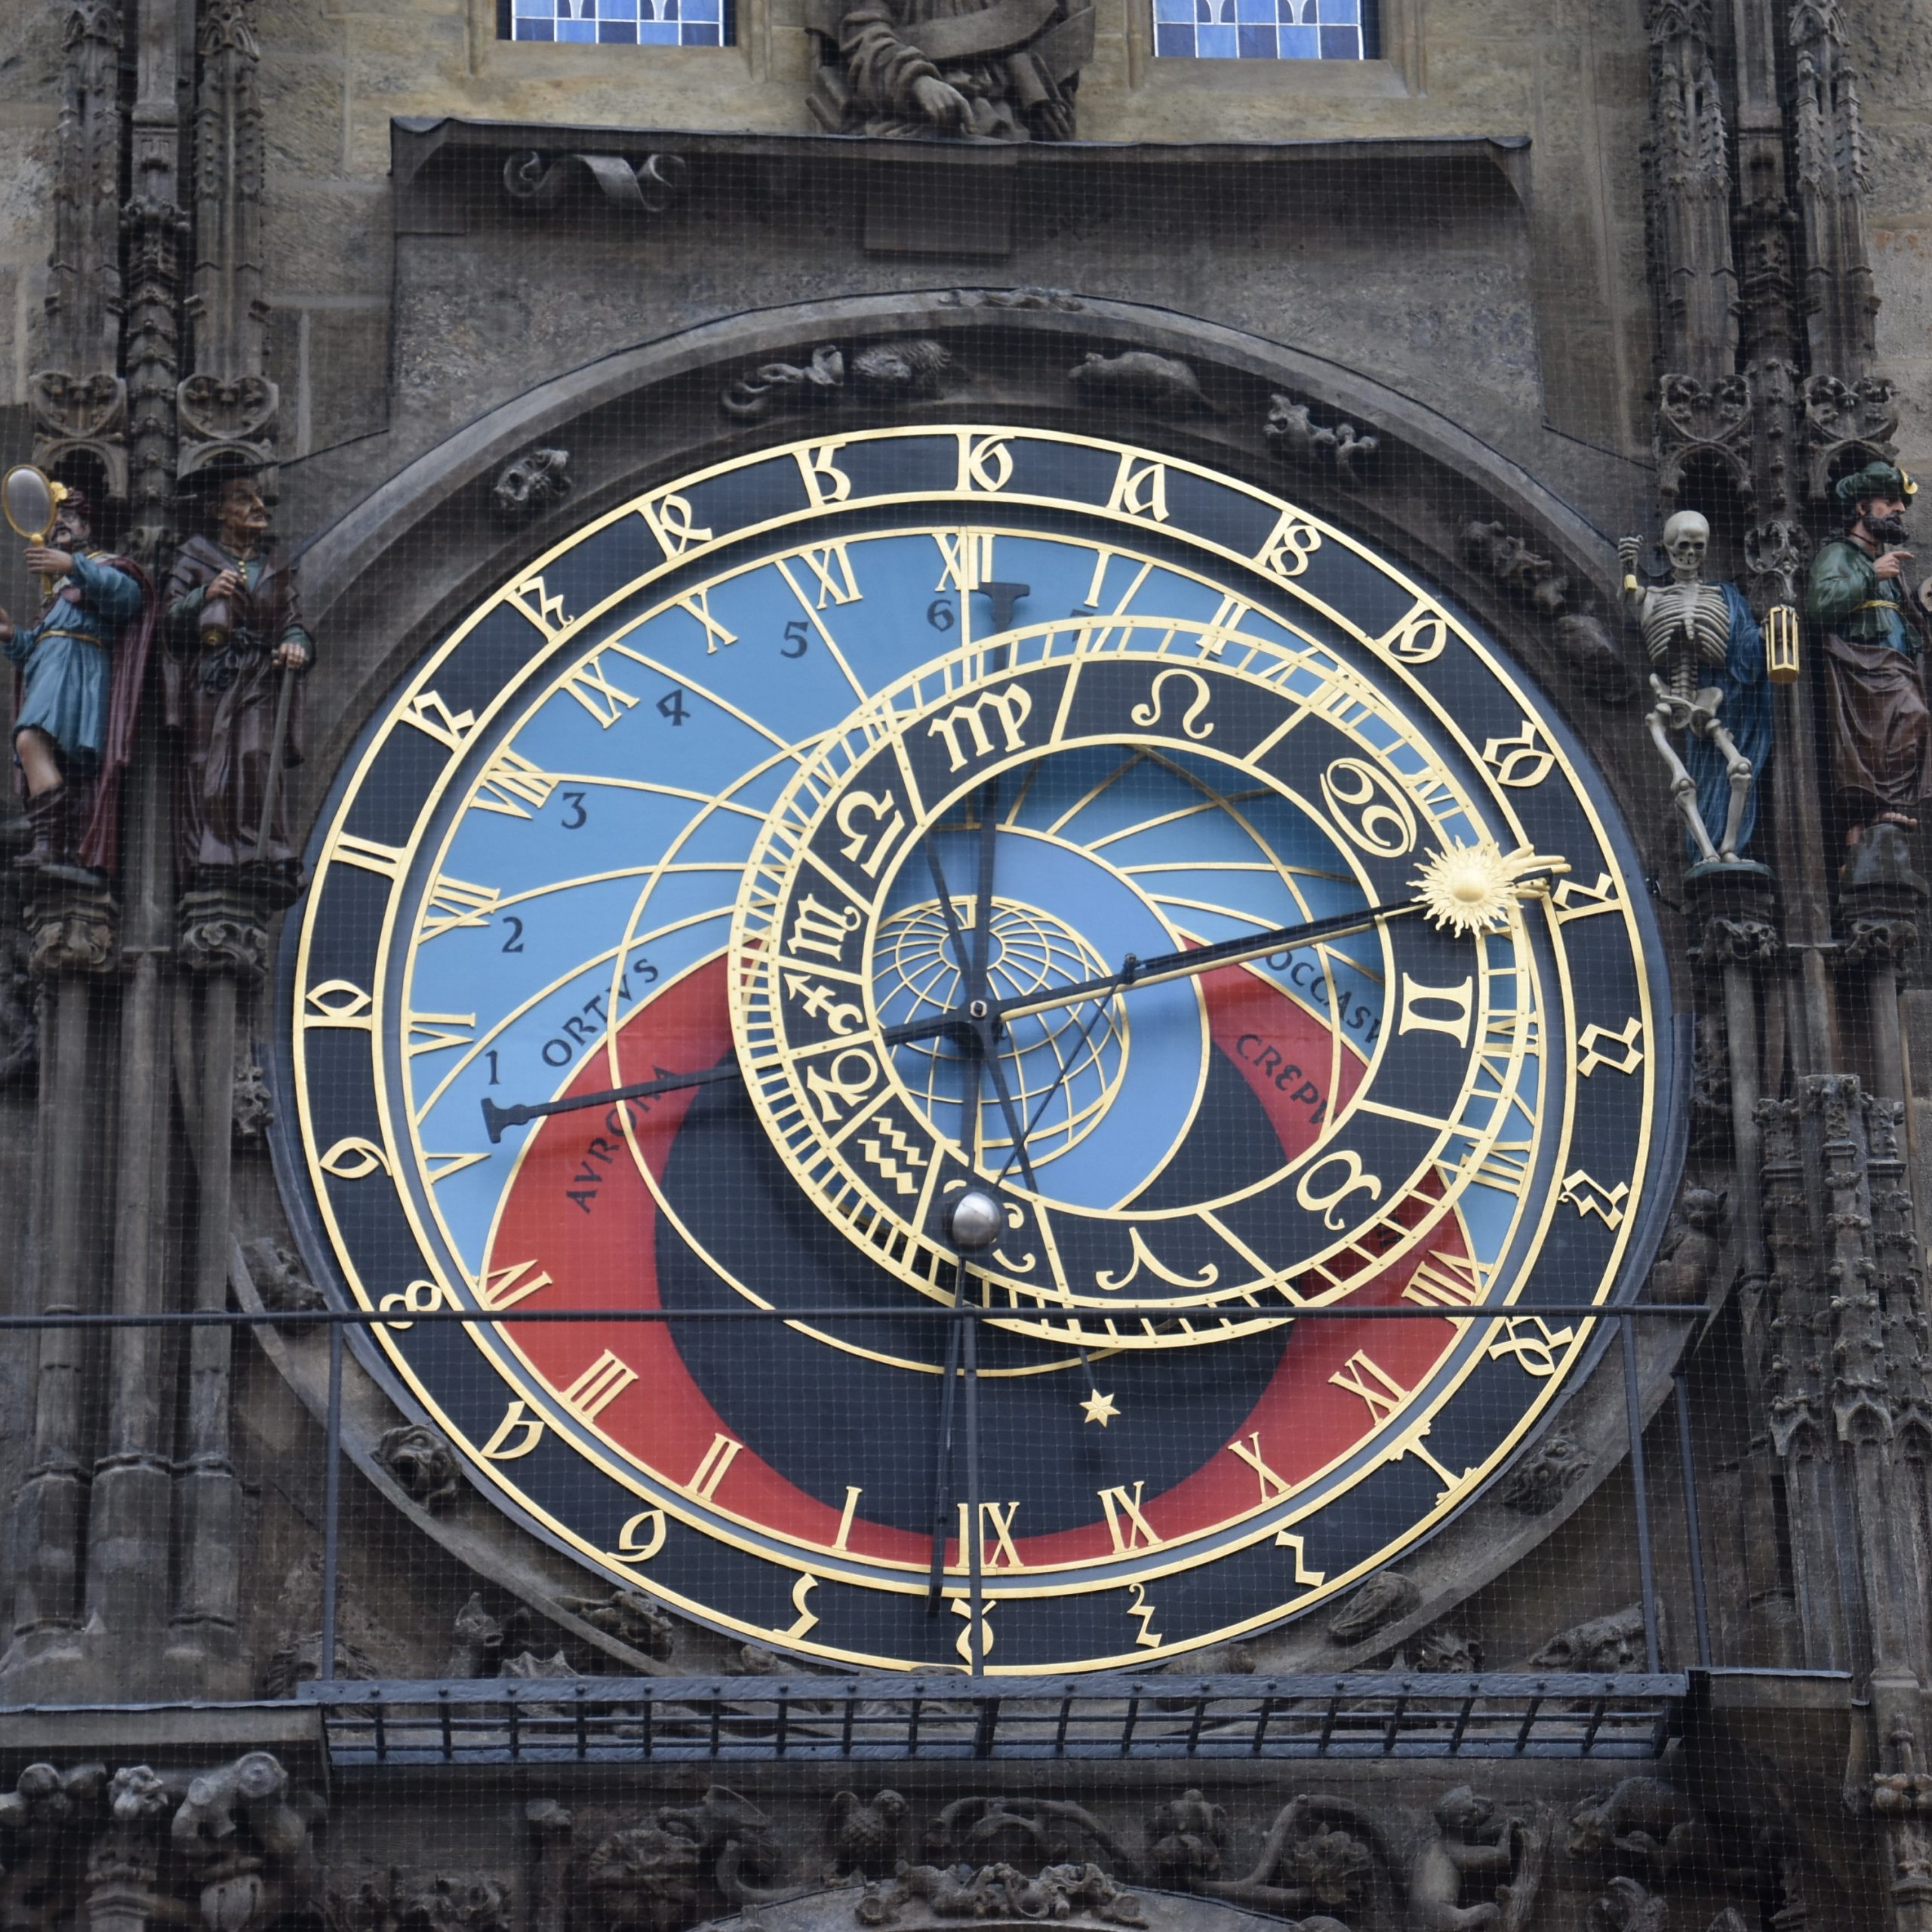 The upper part of the Prague Astronomical Clock.